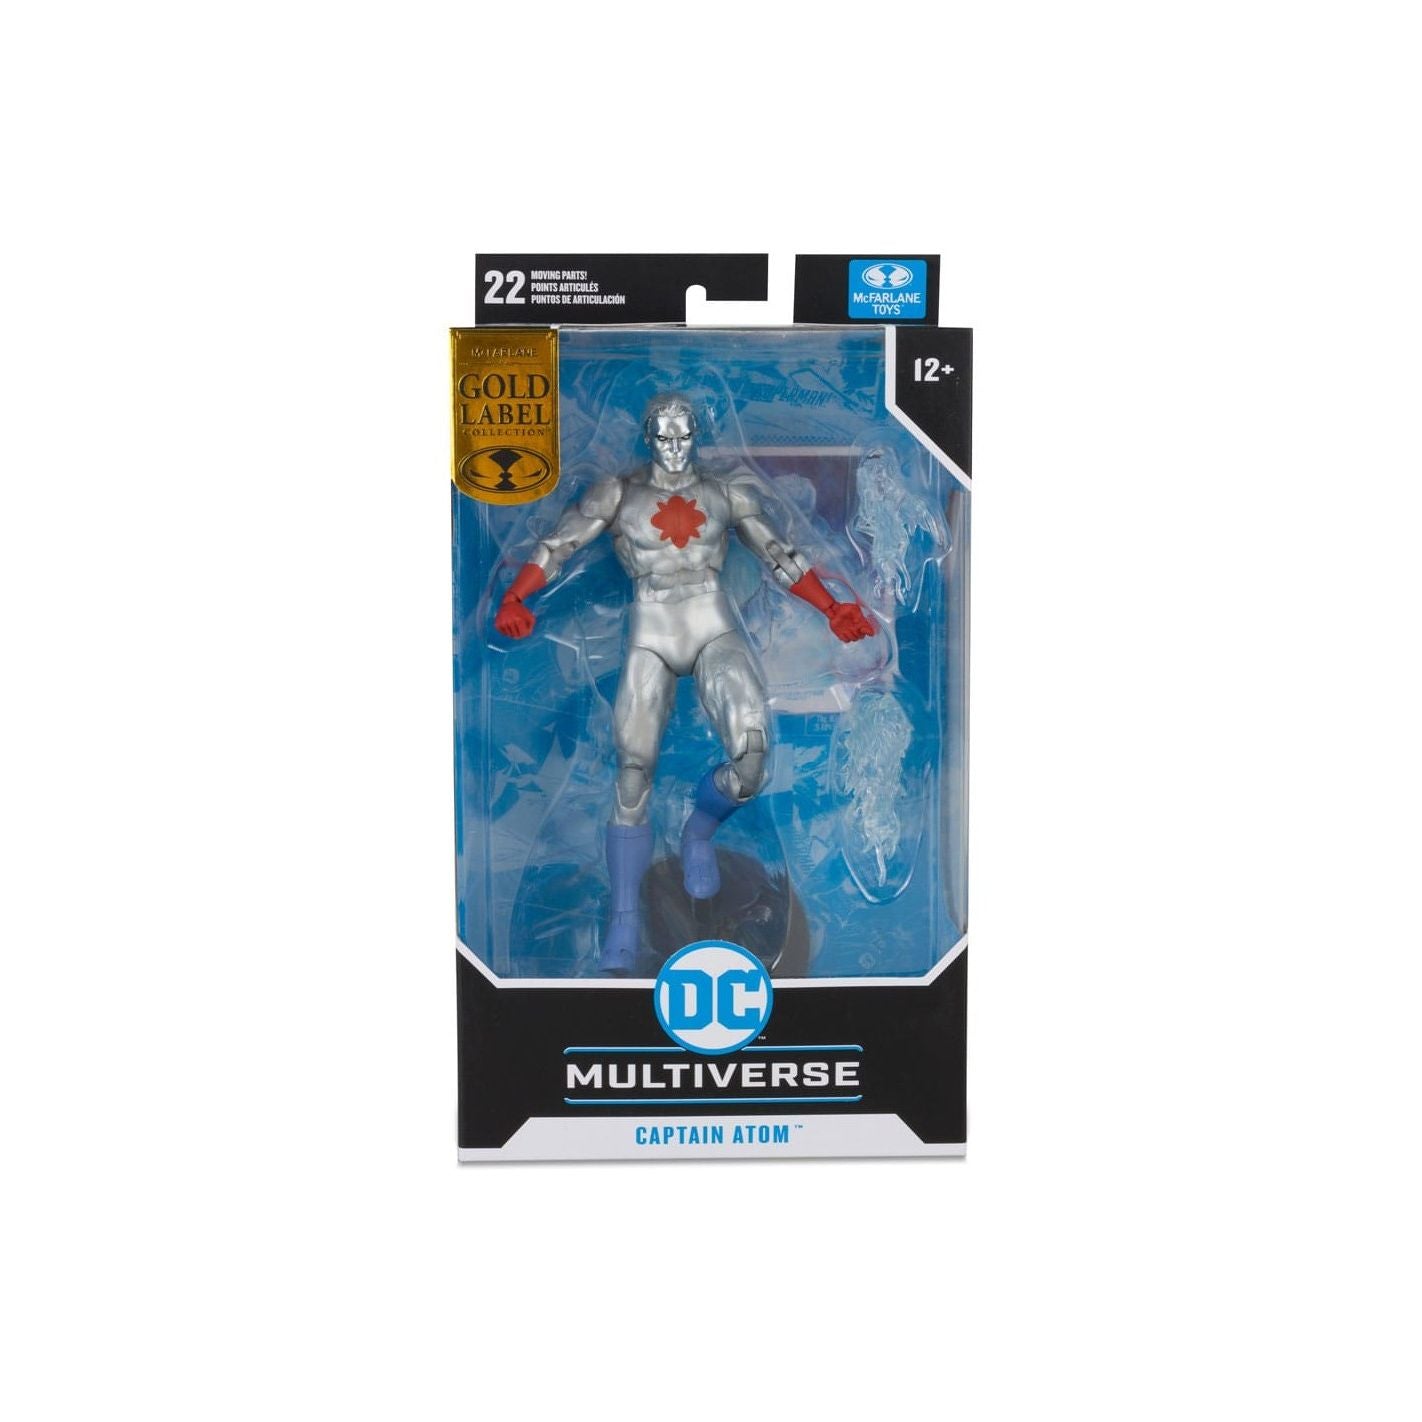 DC Multiverse Captain Atom (New 52) Gold Label Action Figure Toy in a packaging - Heretoserveyou